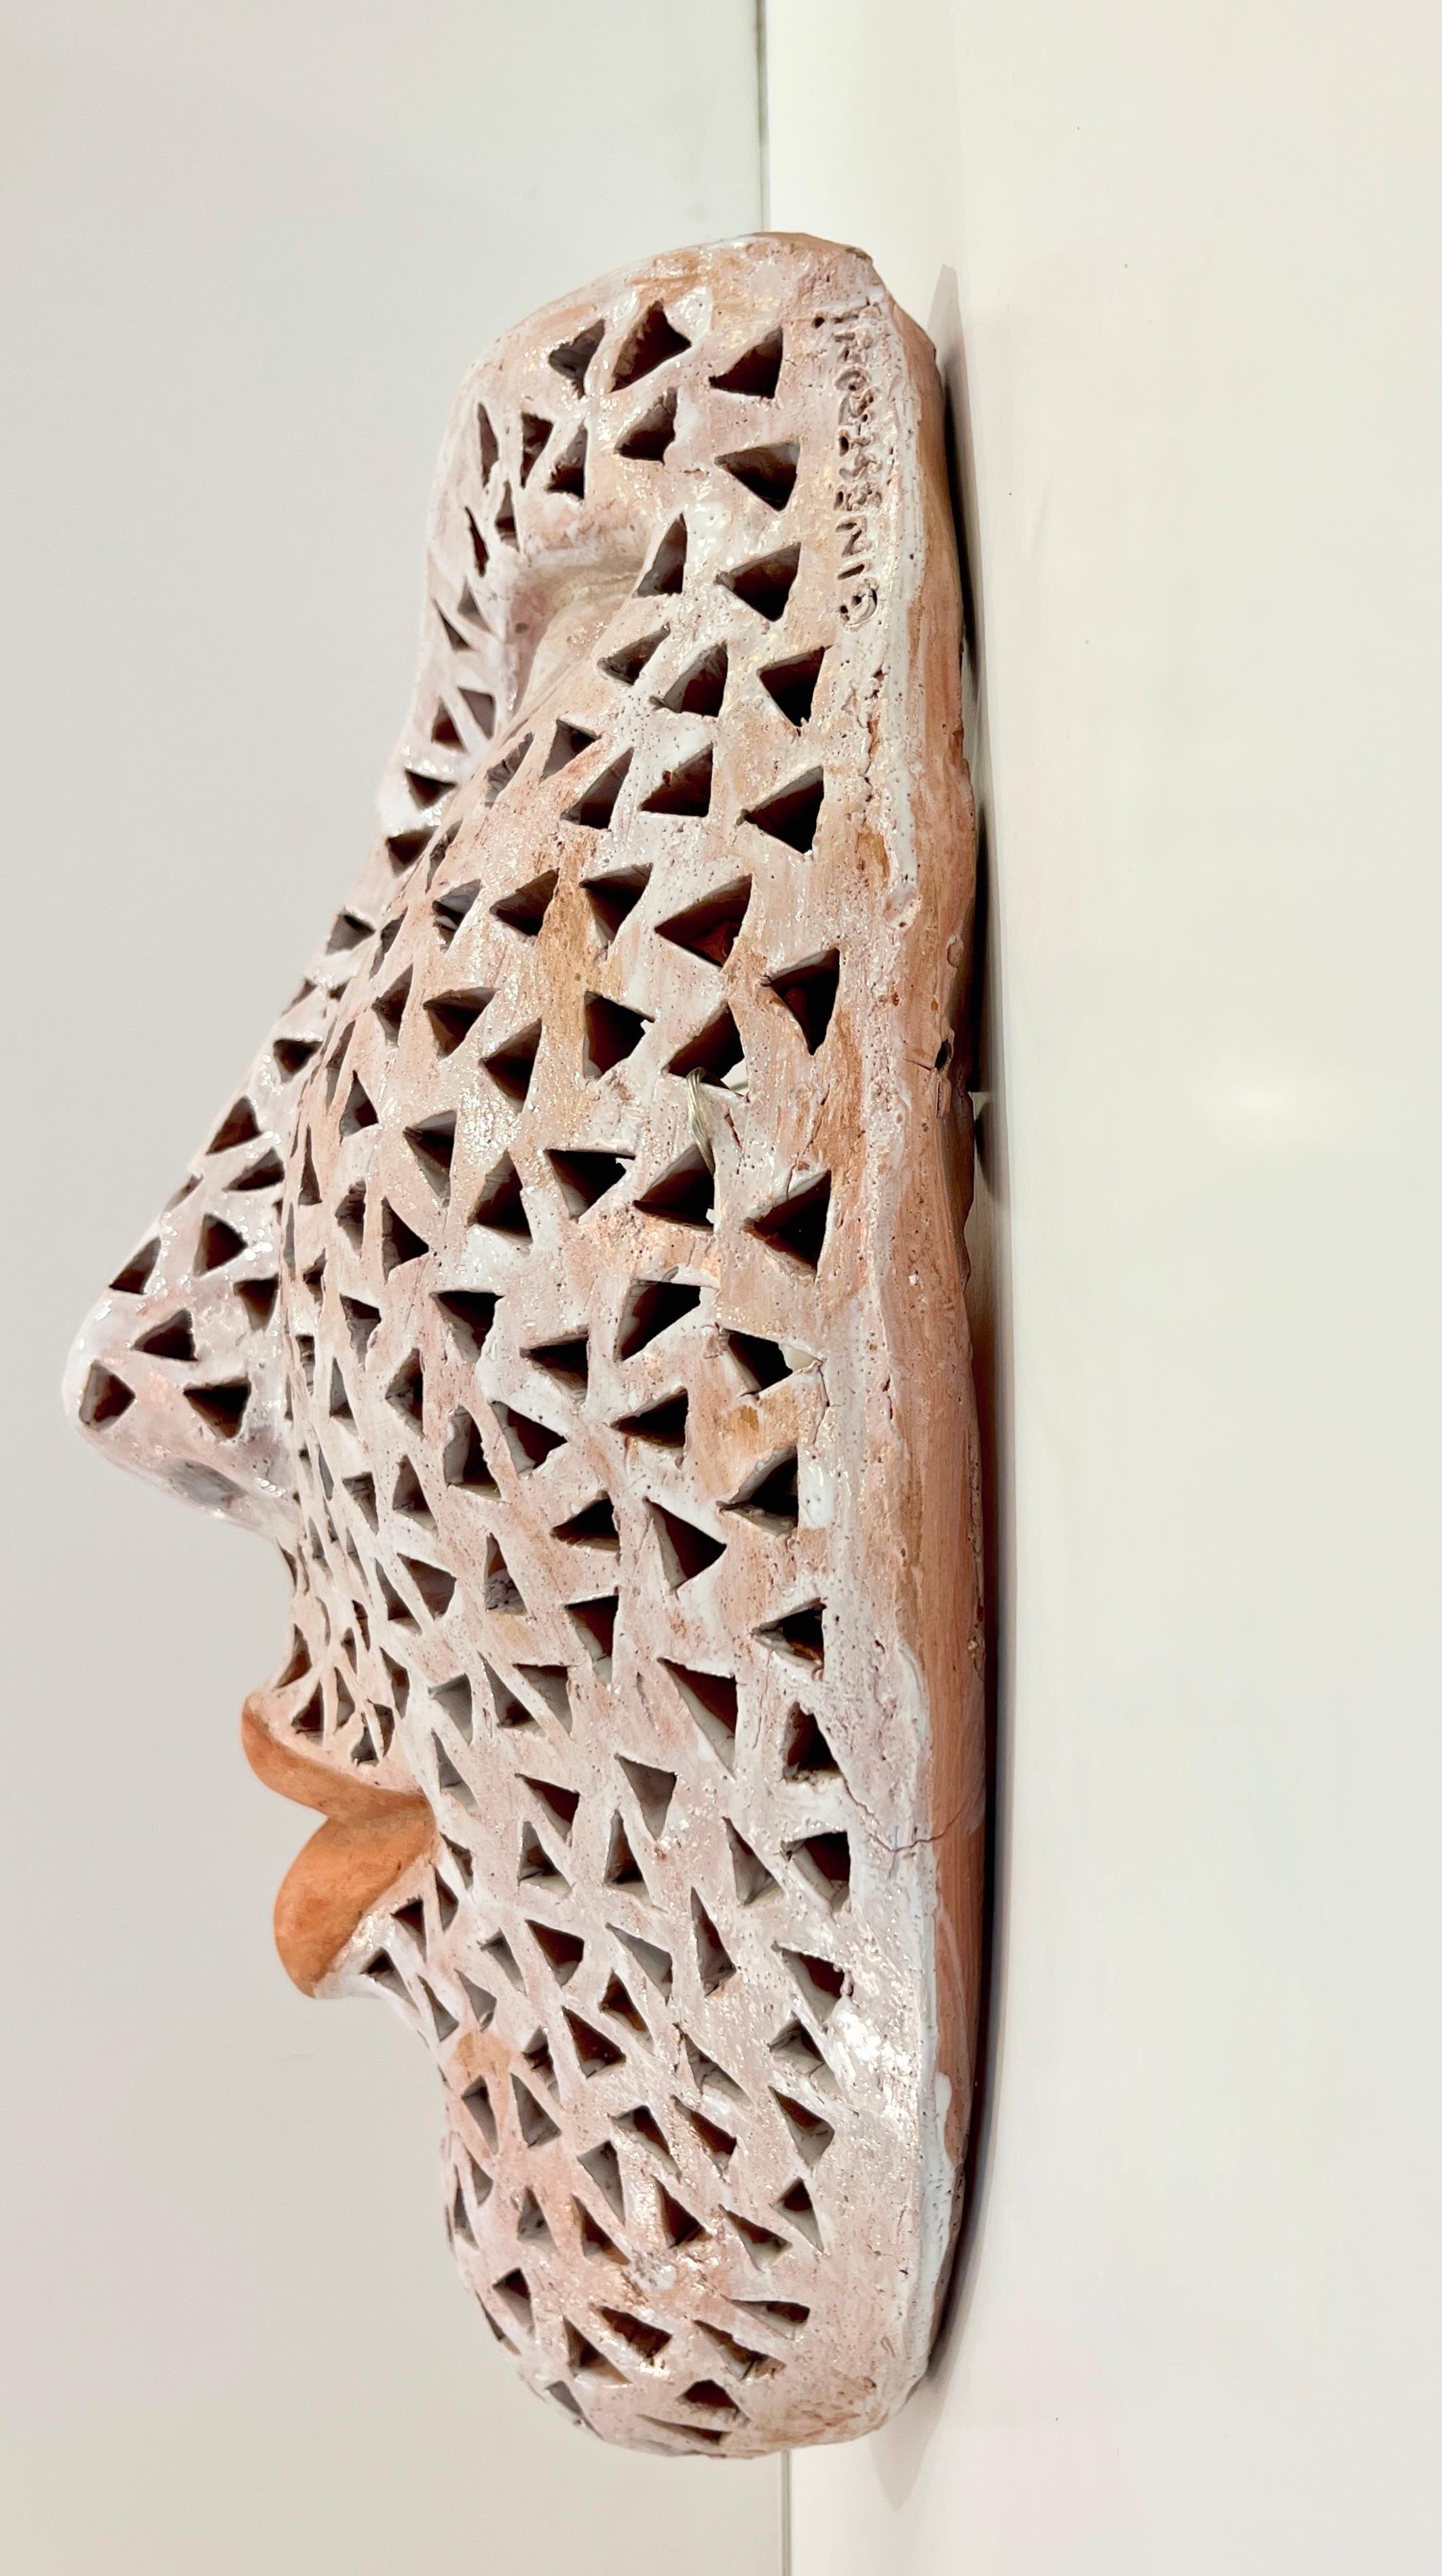 Organic Modern Italian Modern Perforated White Enameled Terracotta Wall Sculpture by Ginestroni